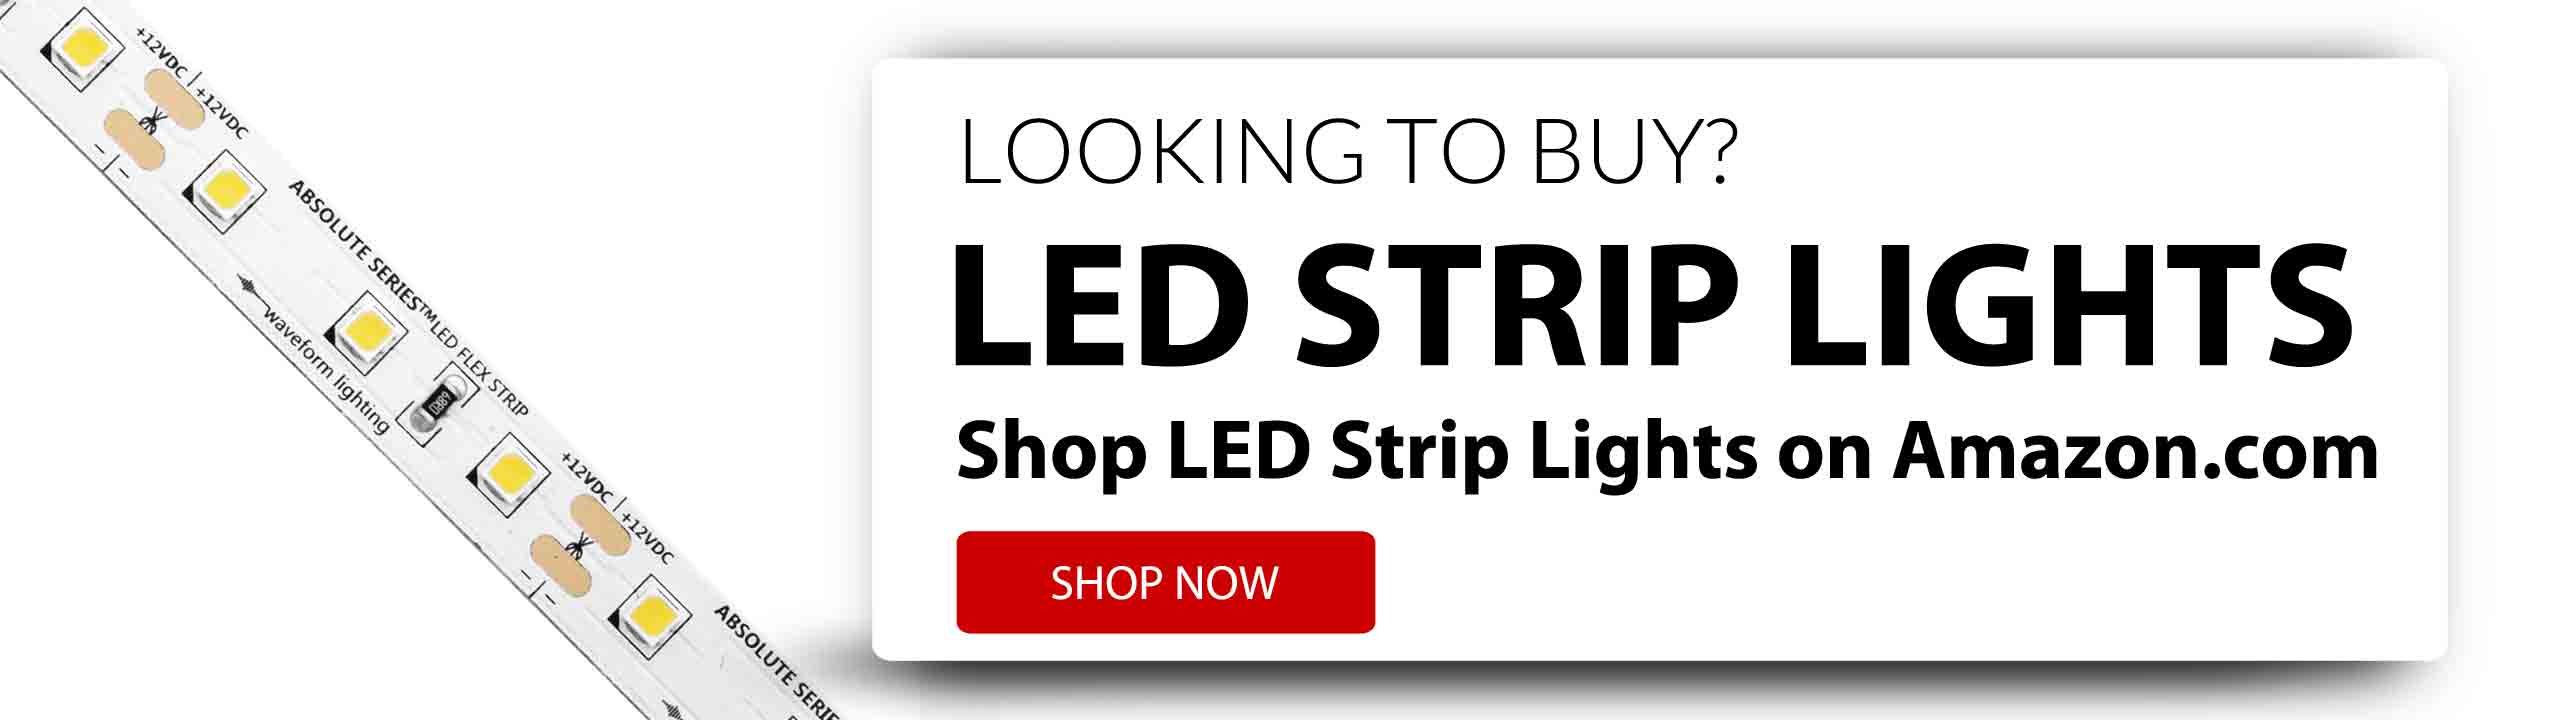 I have a Warm white LED strip that I connect to 220V AC current using this  included adapter. Can I make it work with wifi Controllers? LED strip is  5730 2-pin strip. 